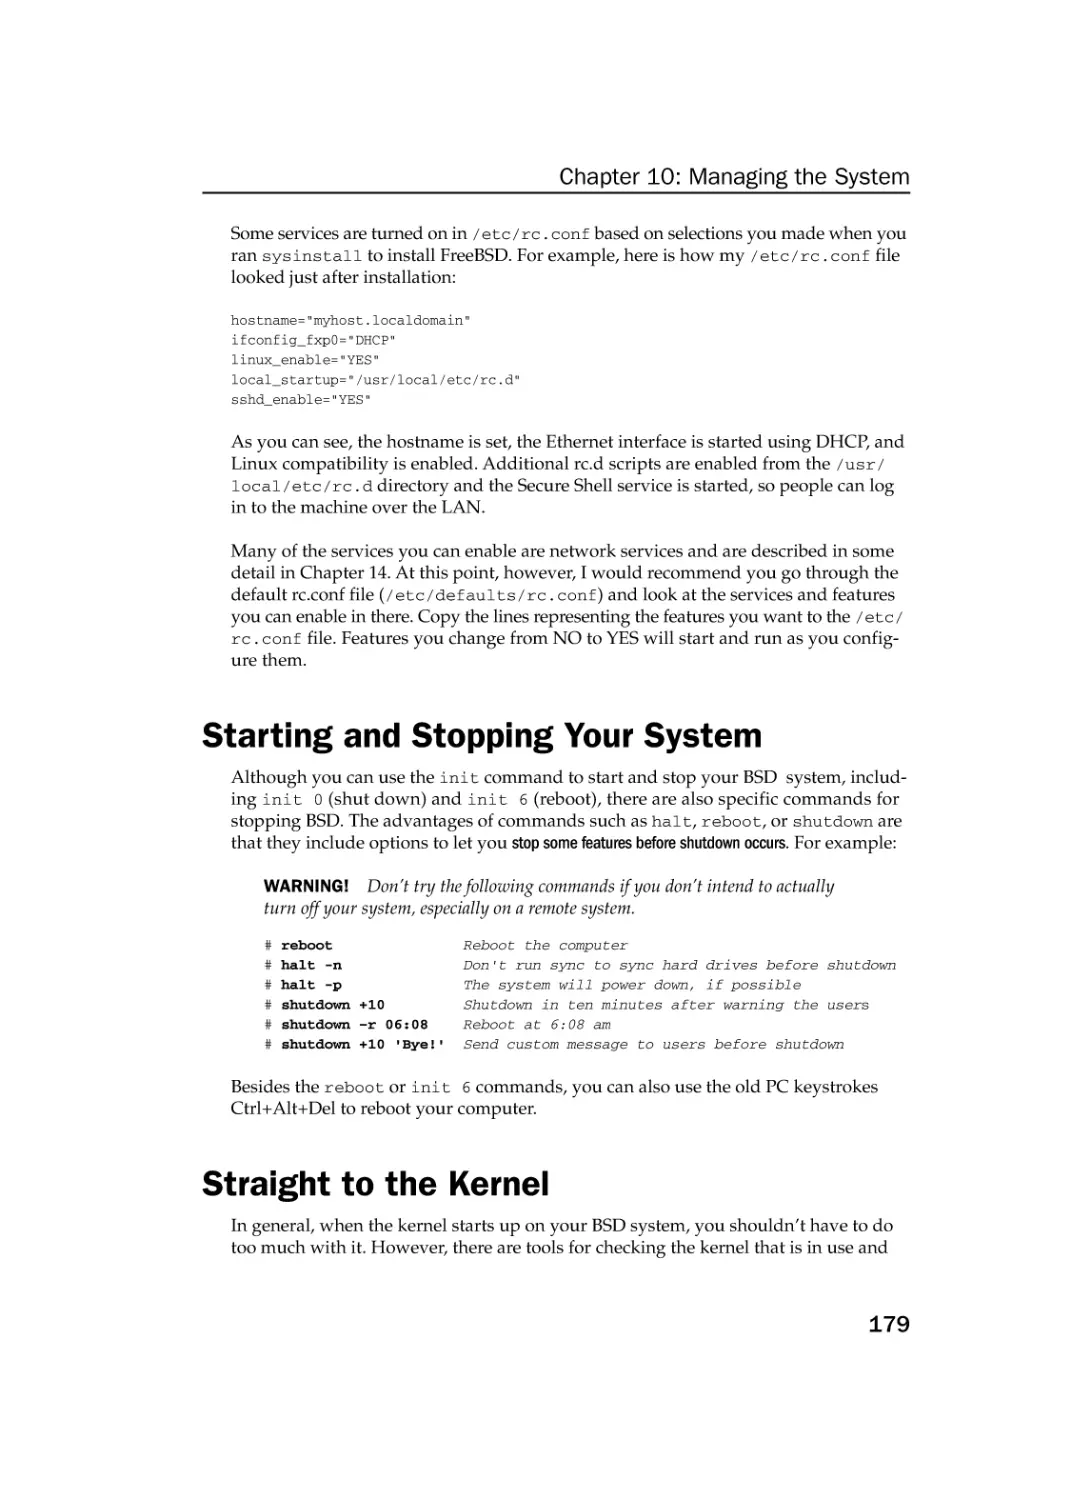 Starting and Stopping Your System
Straight to the Kernel